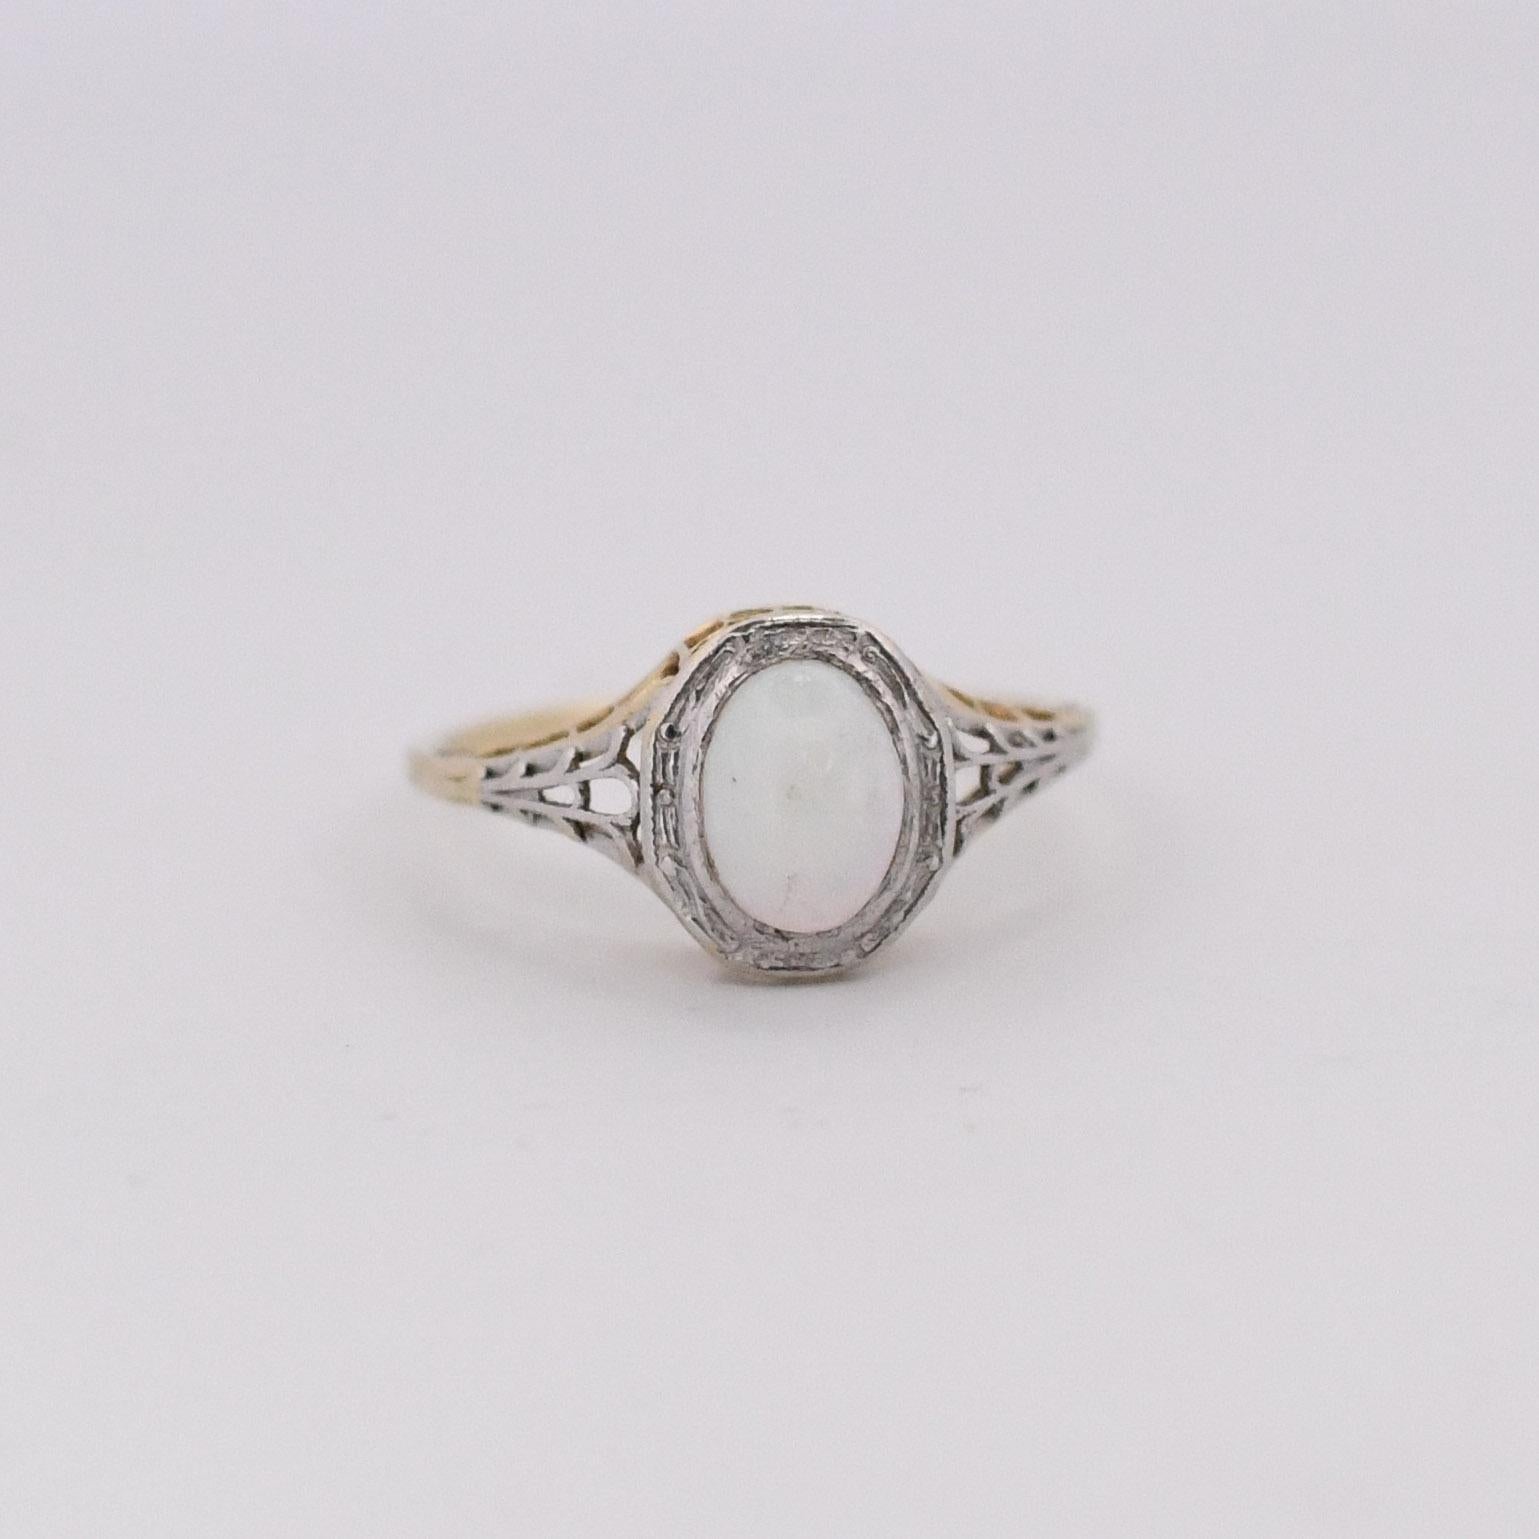 This exquisite ring features a mesmerizing opal, embraced by a setting crafted from 14k yellow gold with a Platinum Top. The delicate filigree detailing on the band adds a touch of vintage elegance, showcasing a harmonious blend of precious metals.